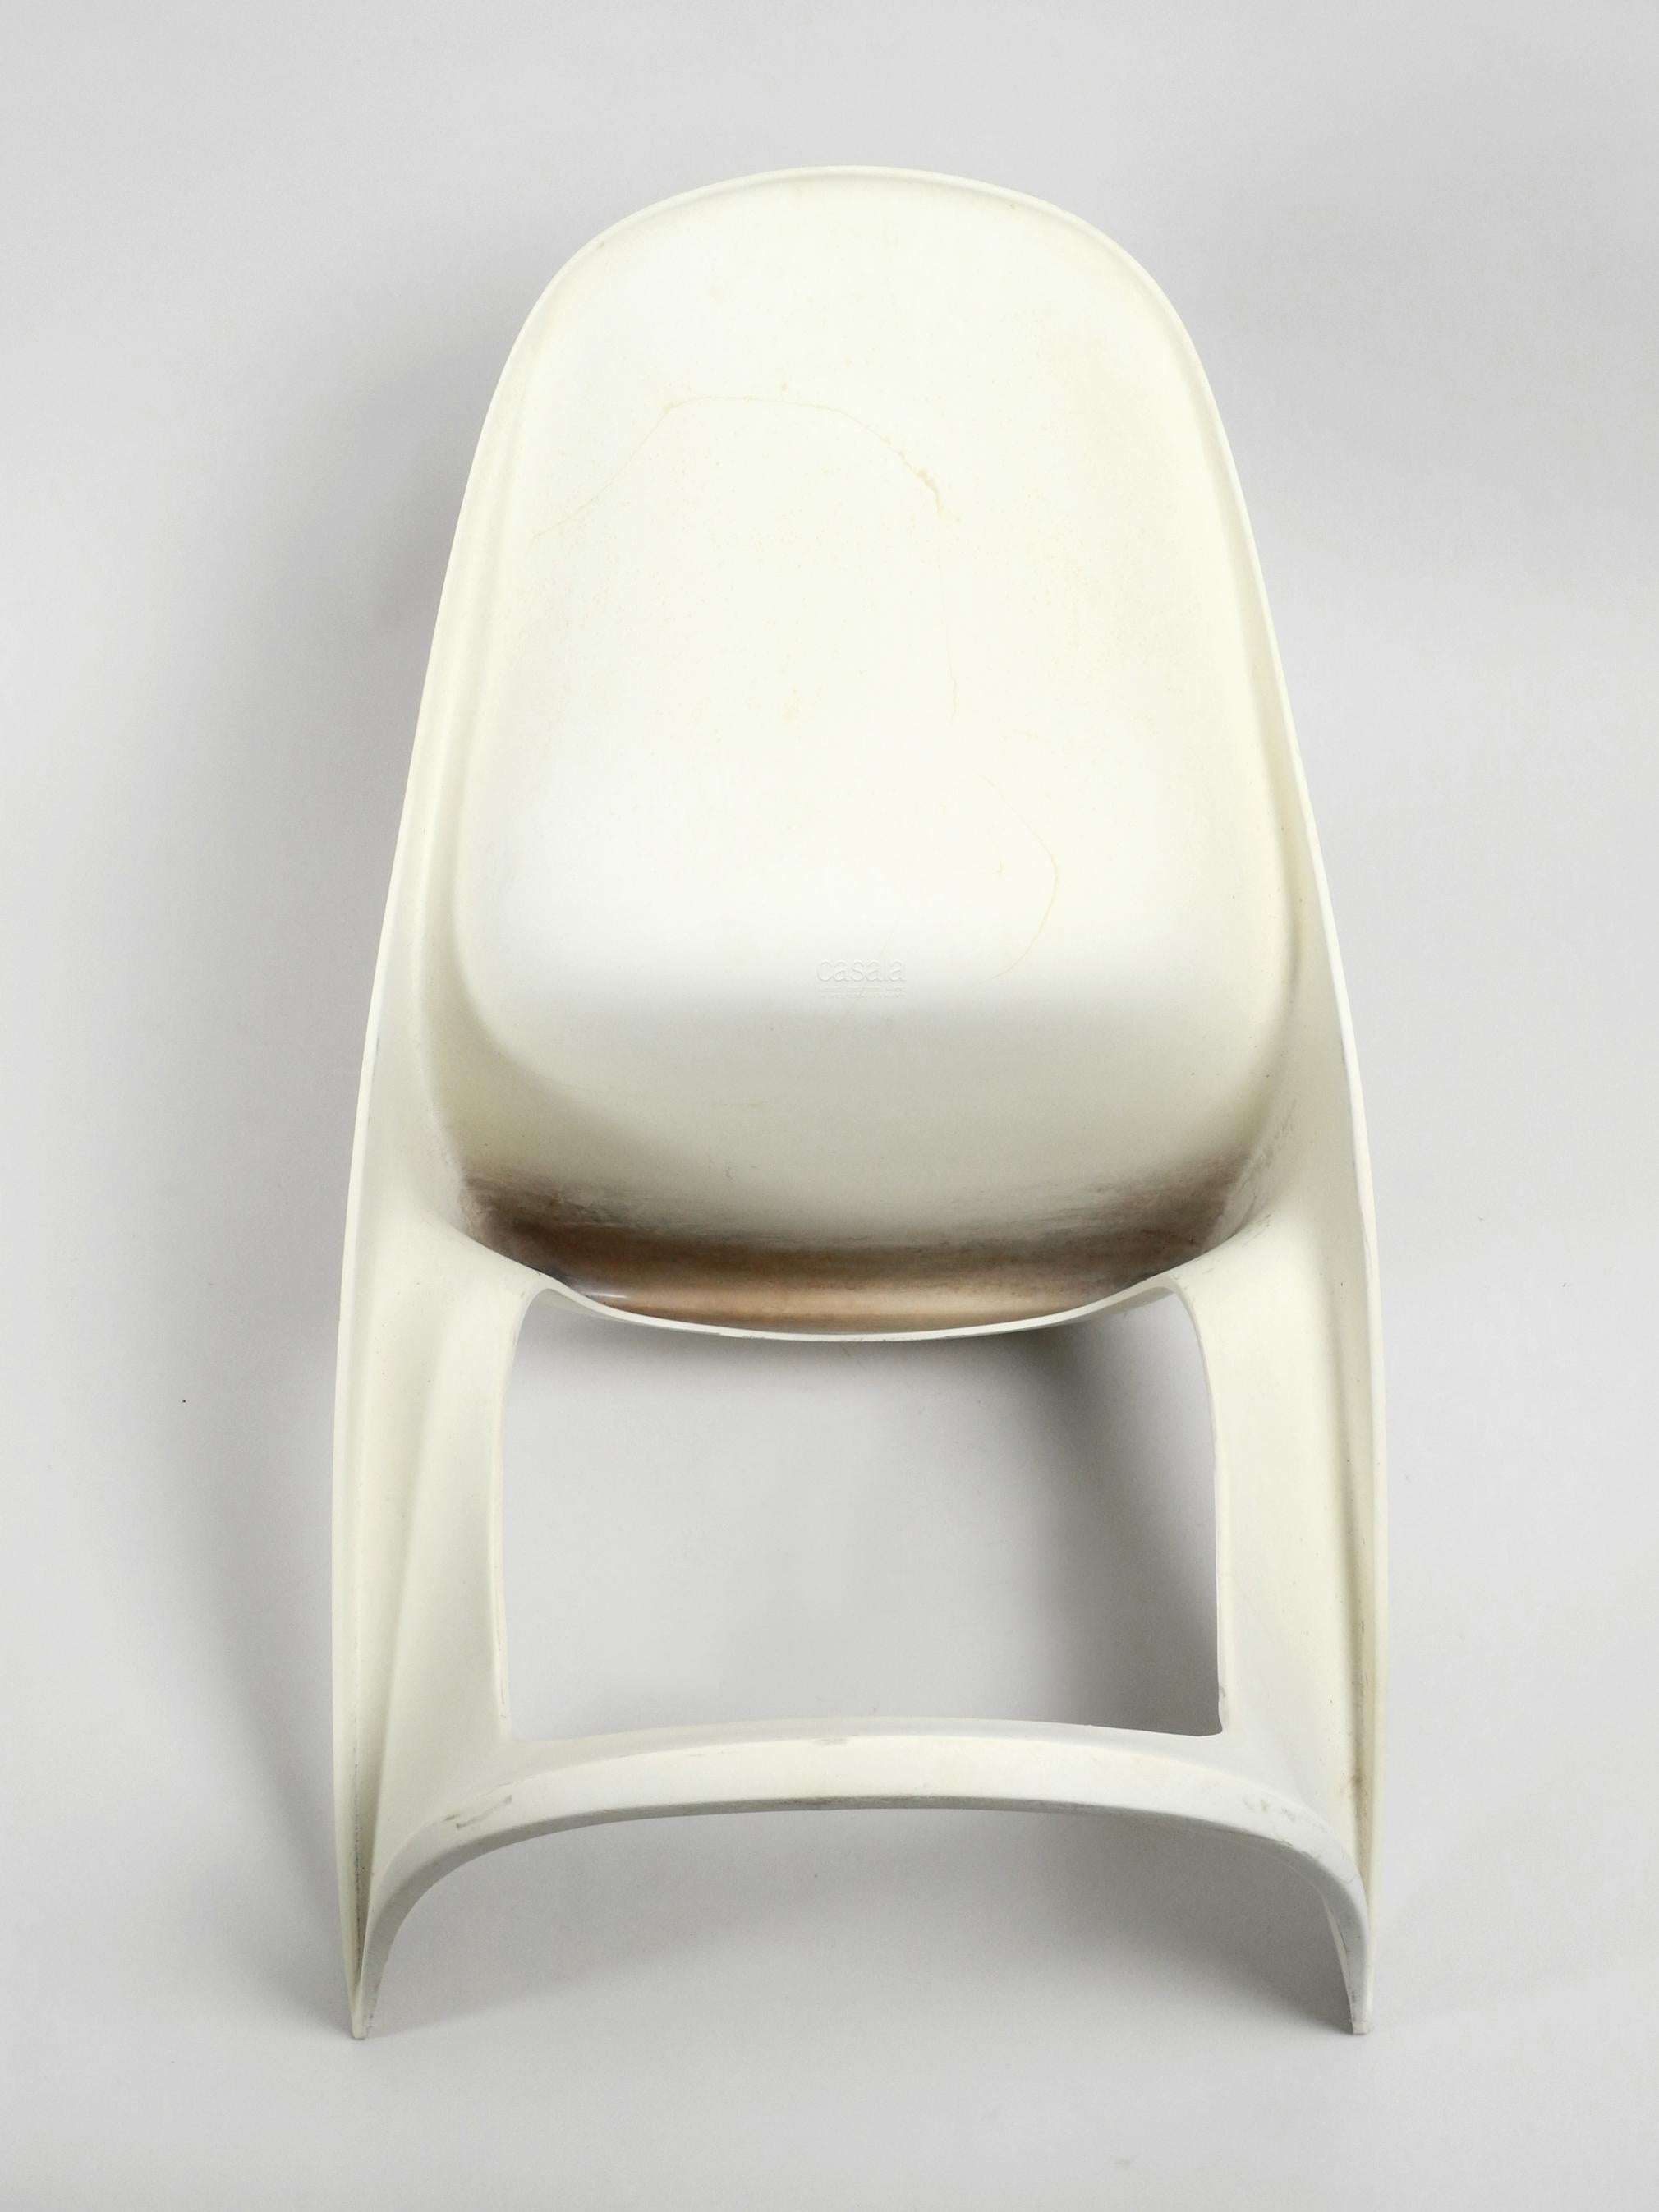 Three Original Casalino Chairs from Casala Model 2004/2005 from 1973 and 1980 1